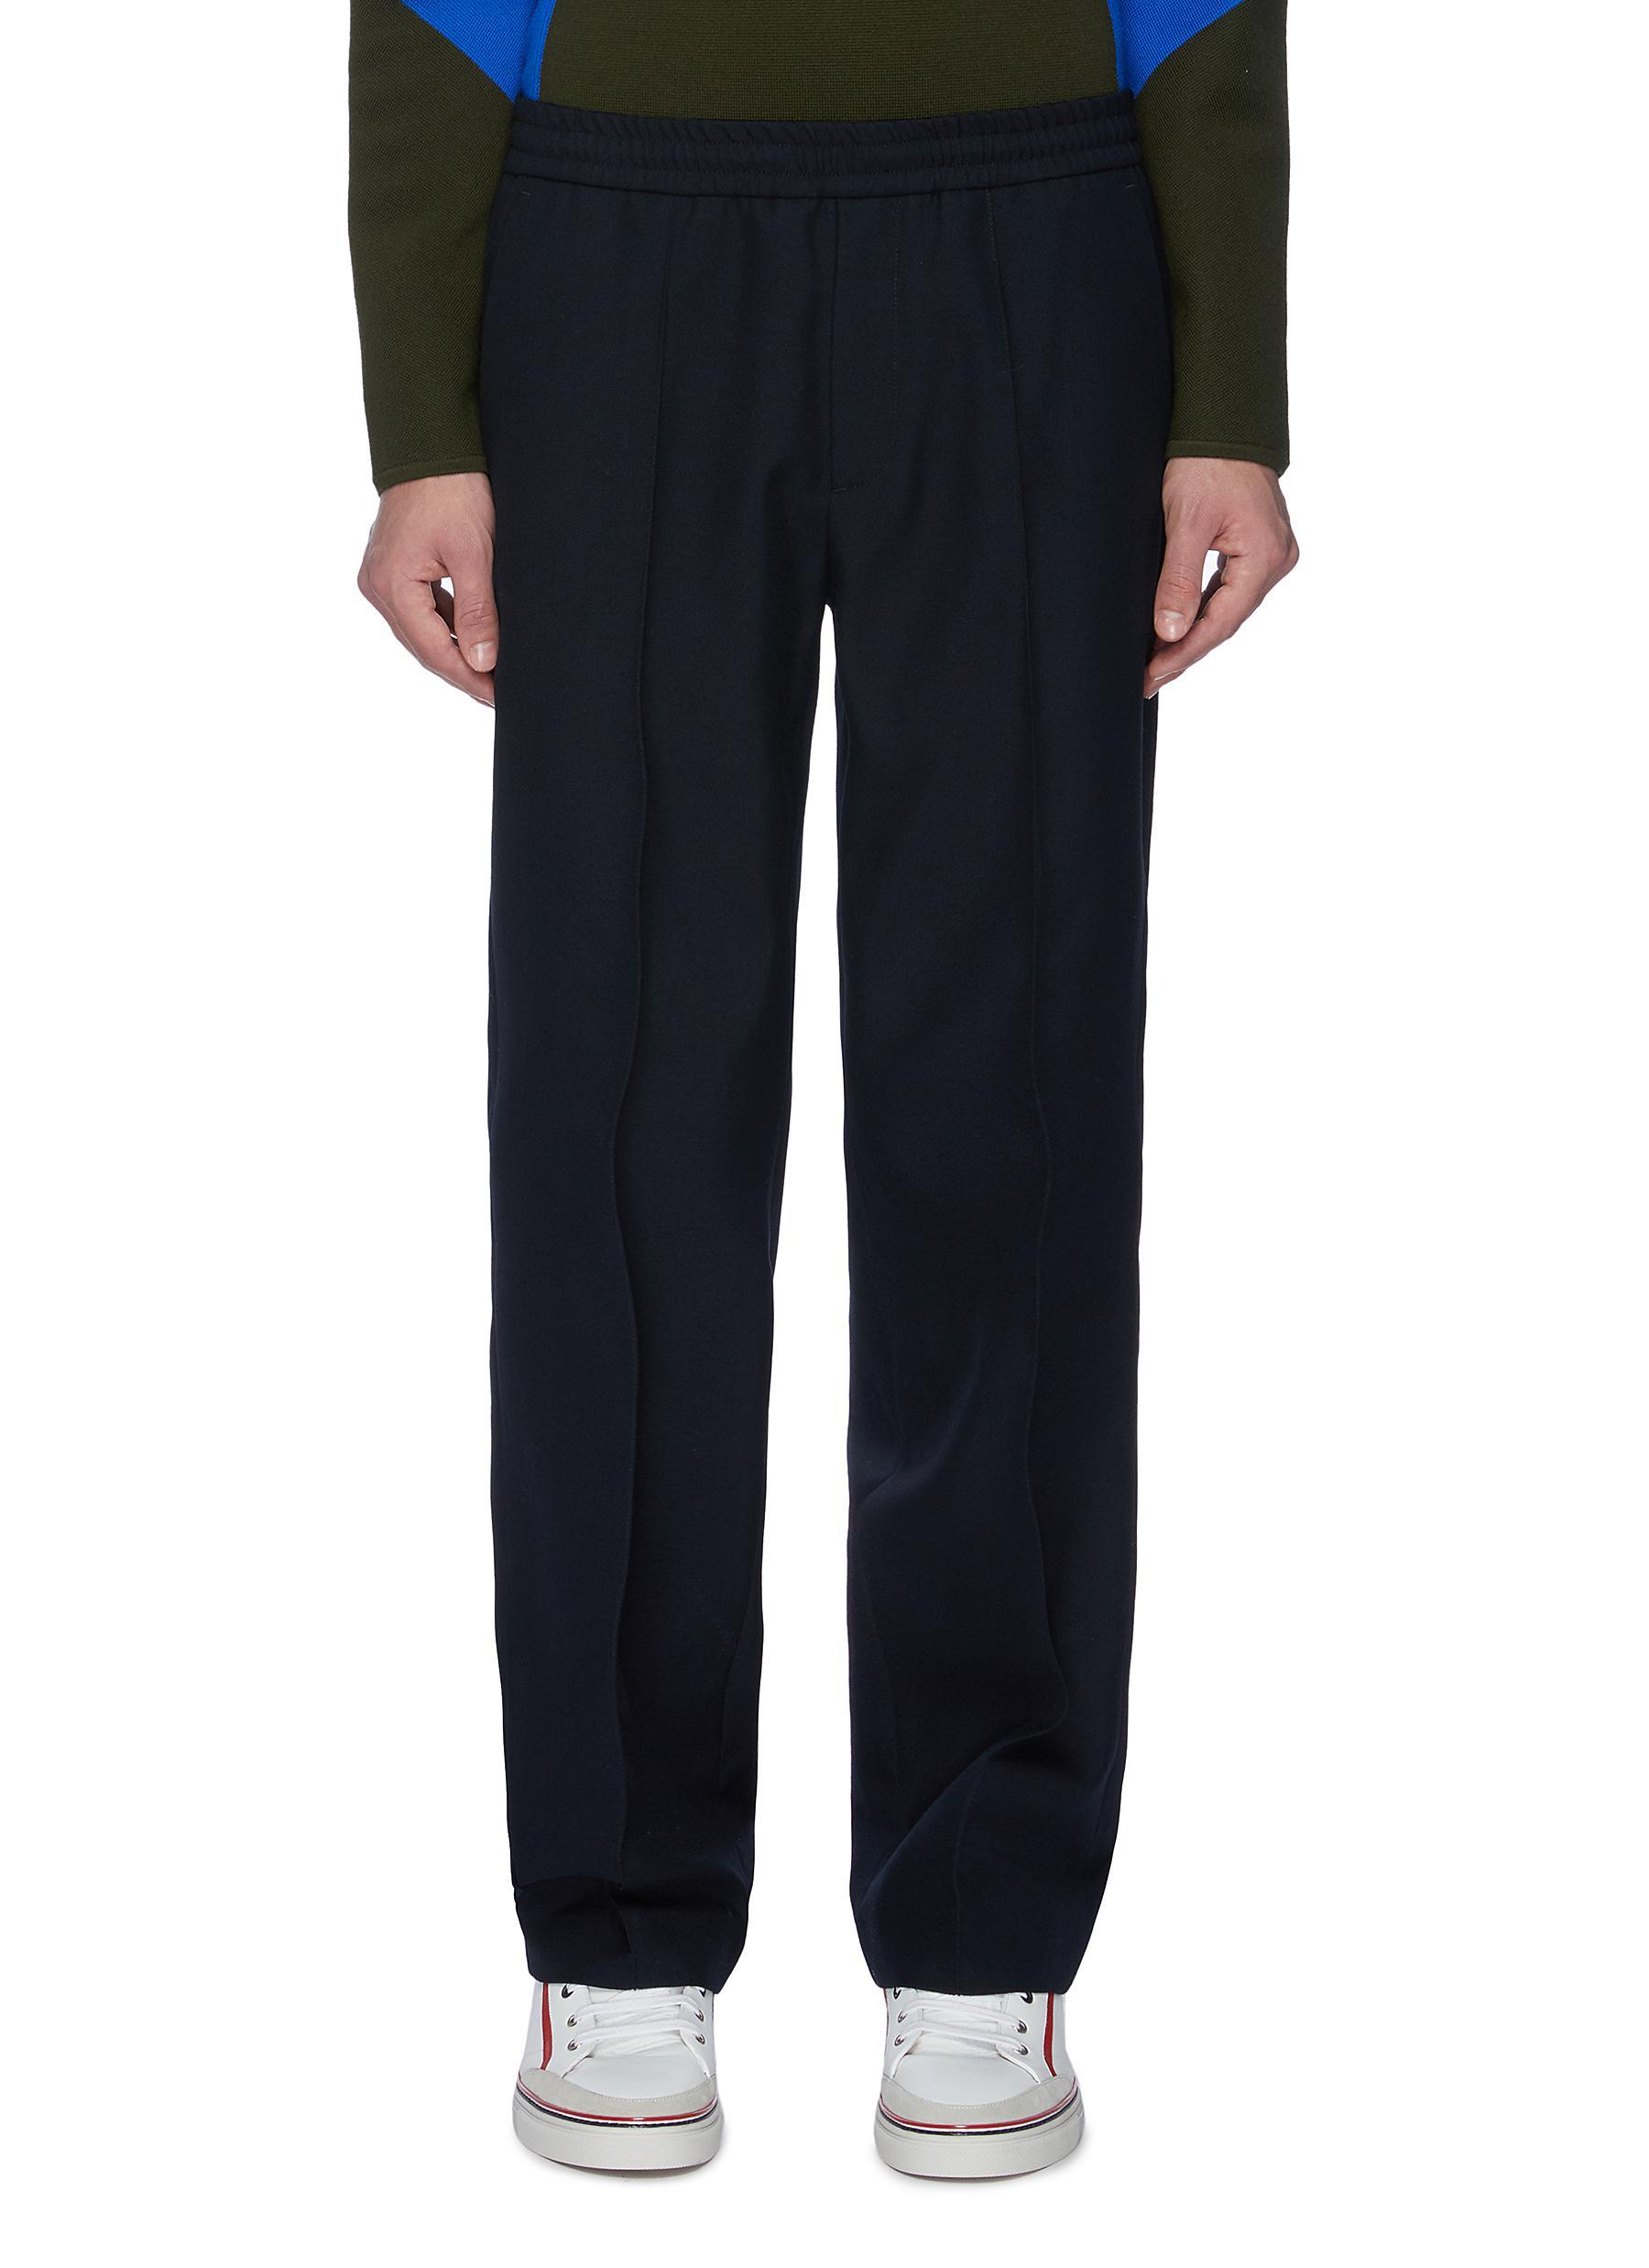 Moncler Synthetic Straight Leg jogging Pants in Blue for Men - Lyst